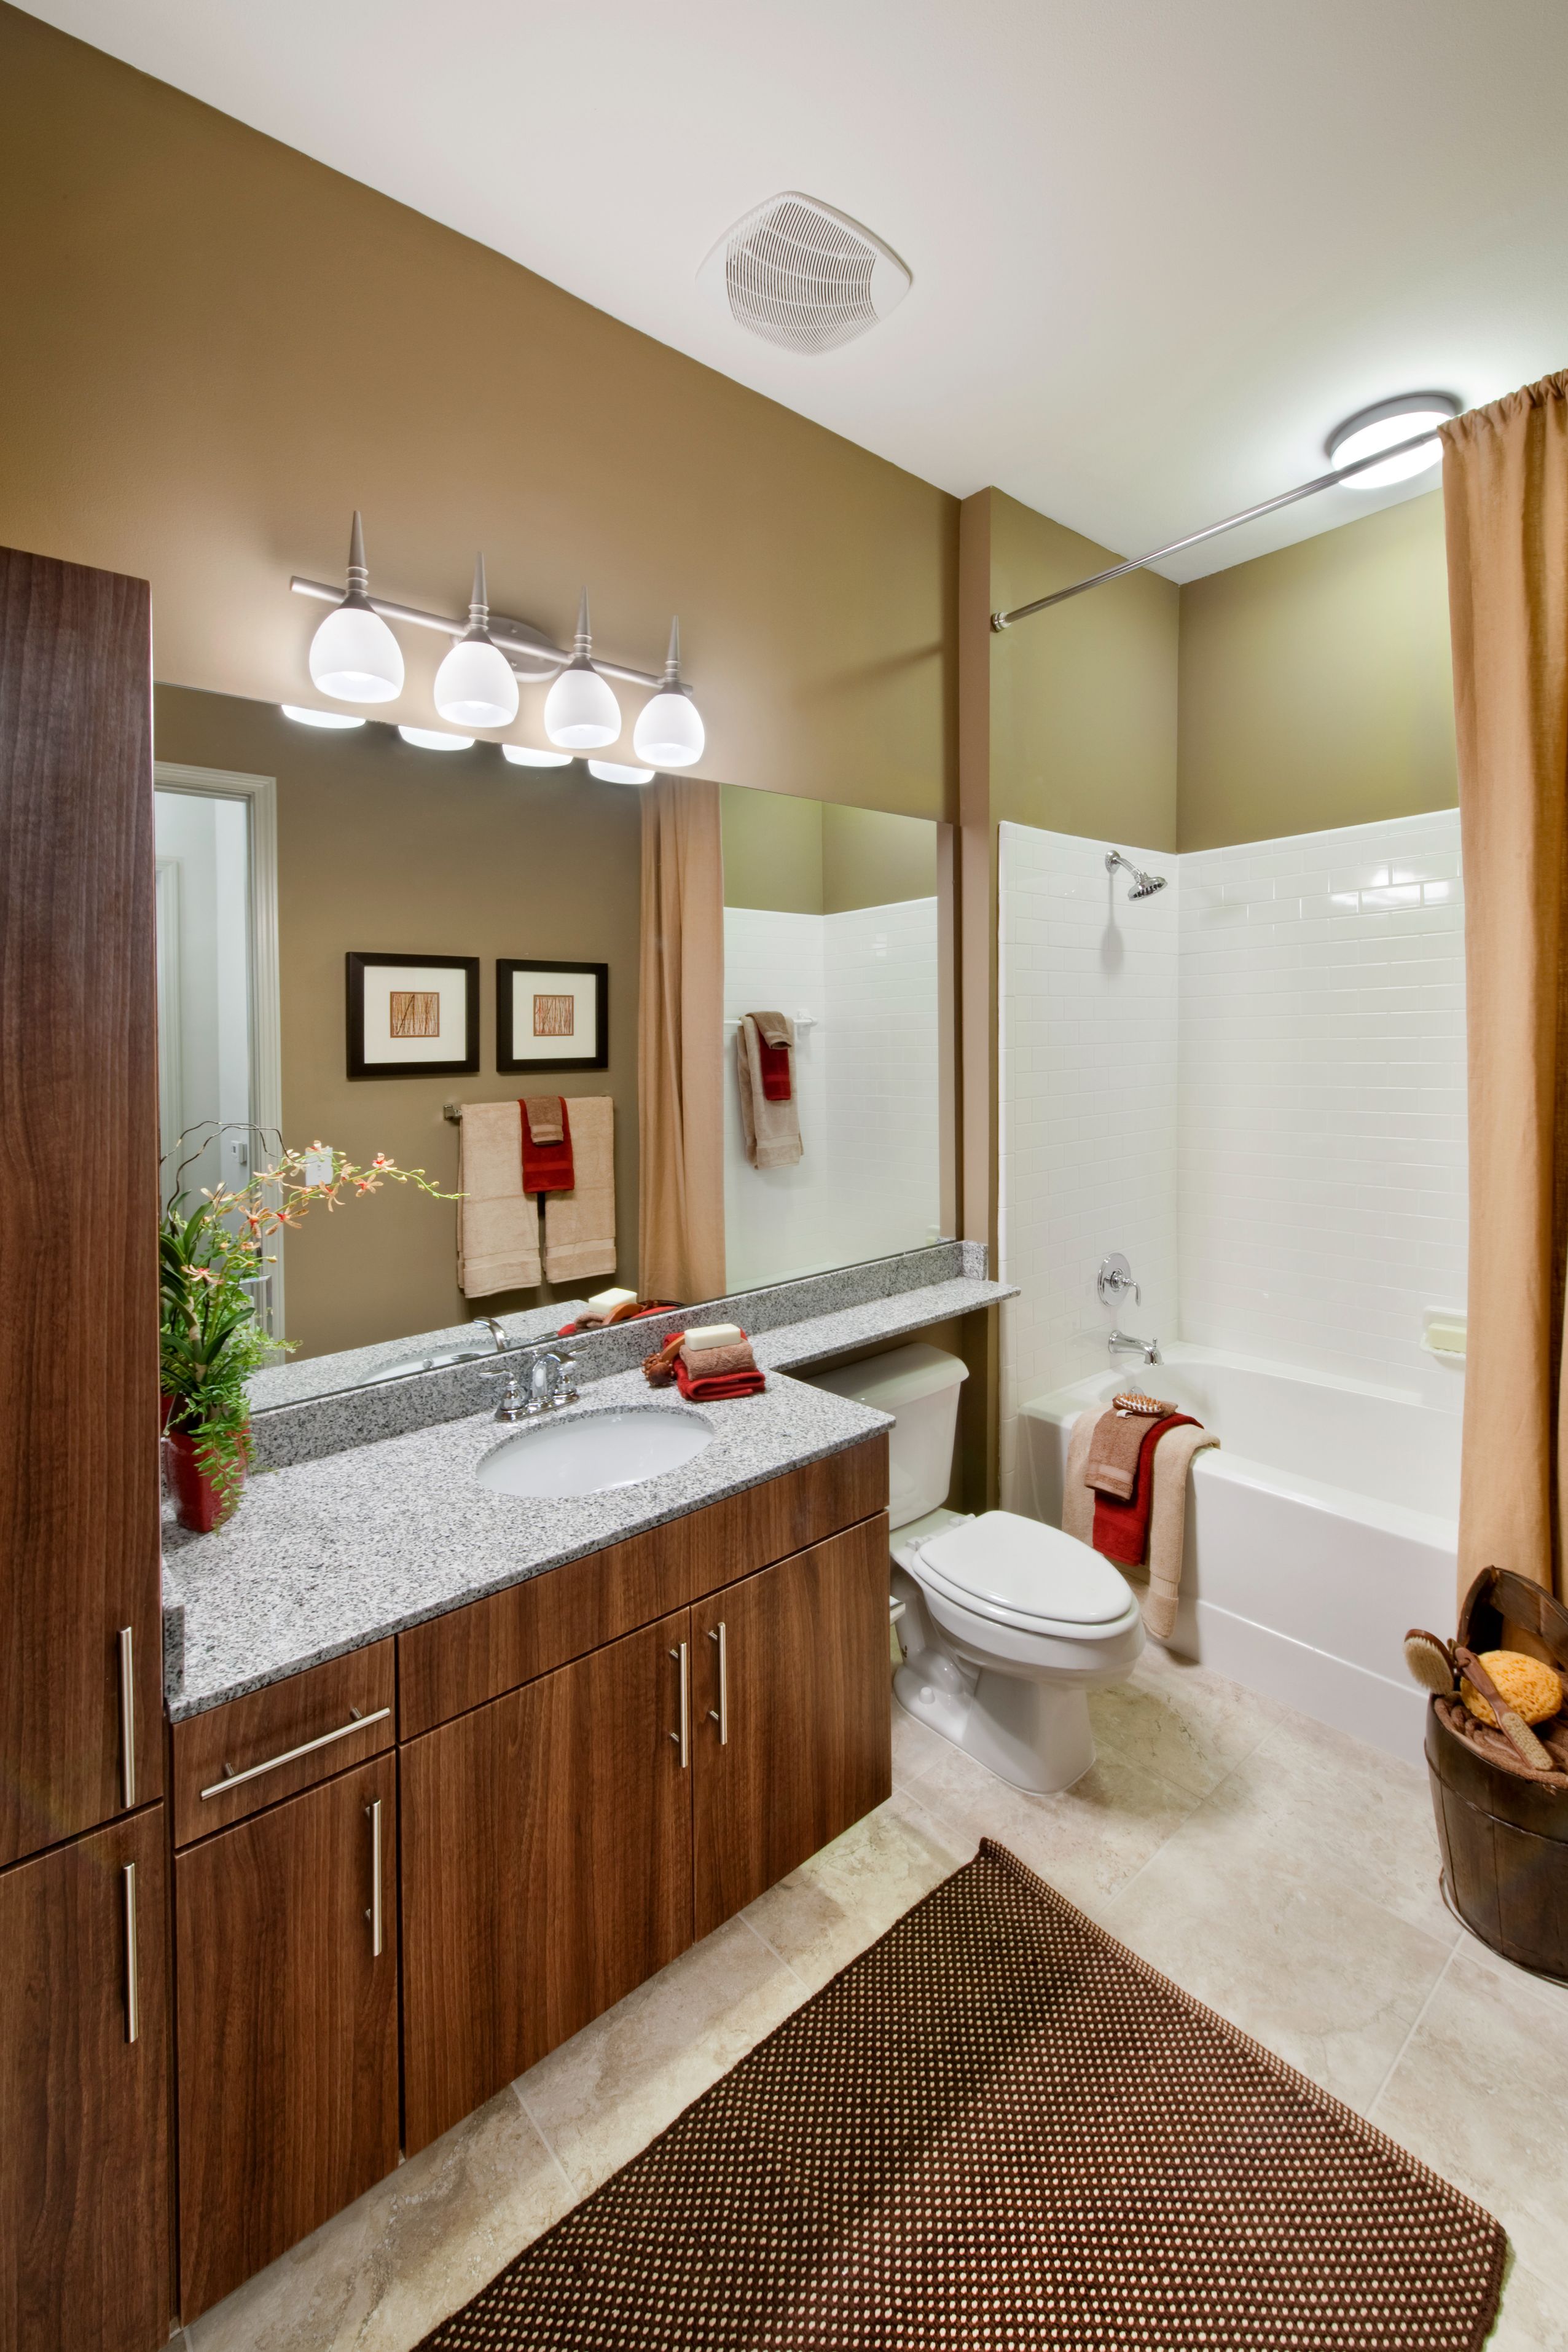 Refined Bathrooms at Brookleigh Flats Apartments in Brookhaven, GA